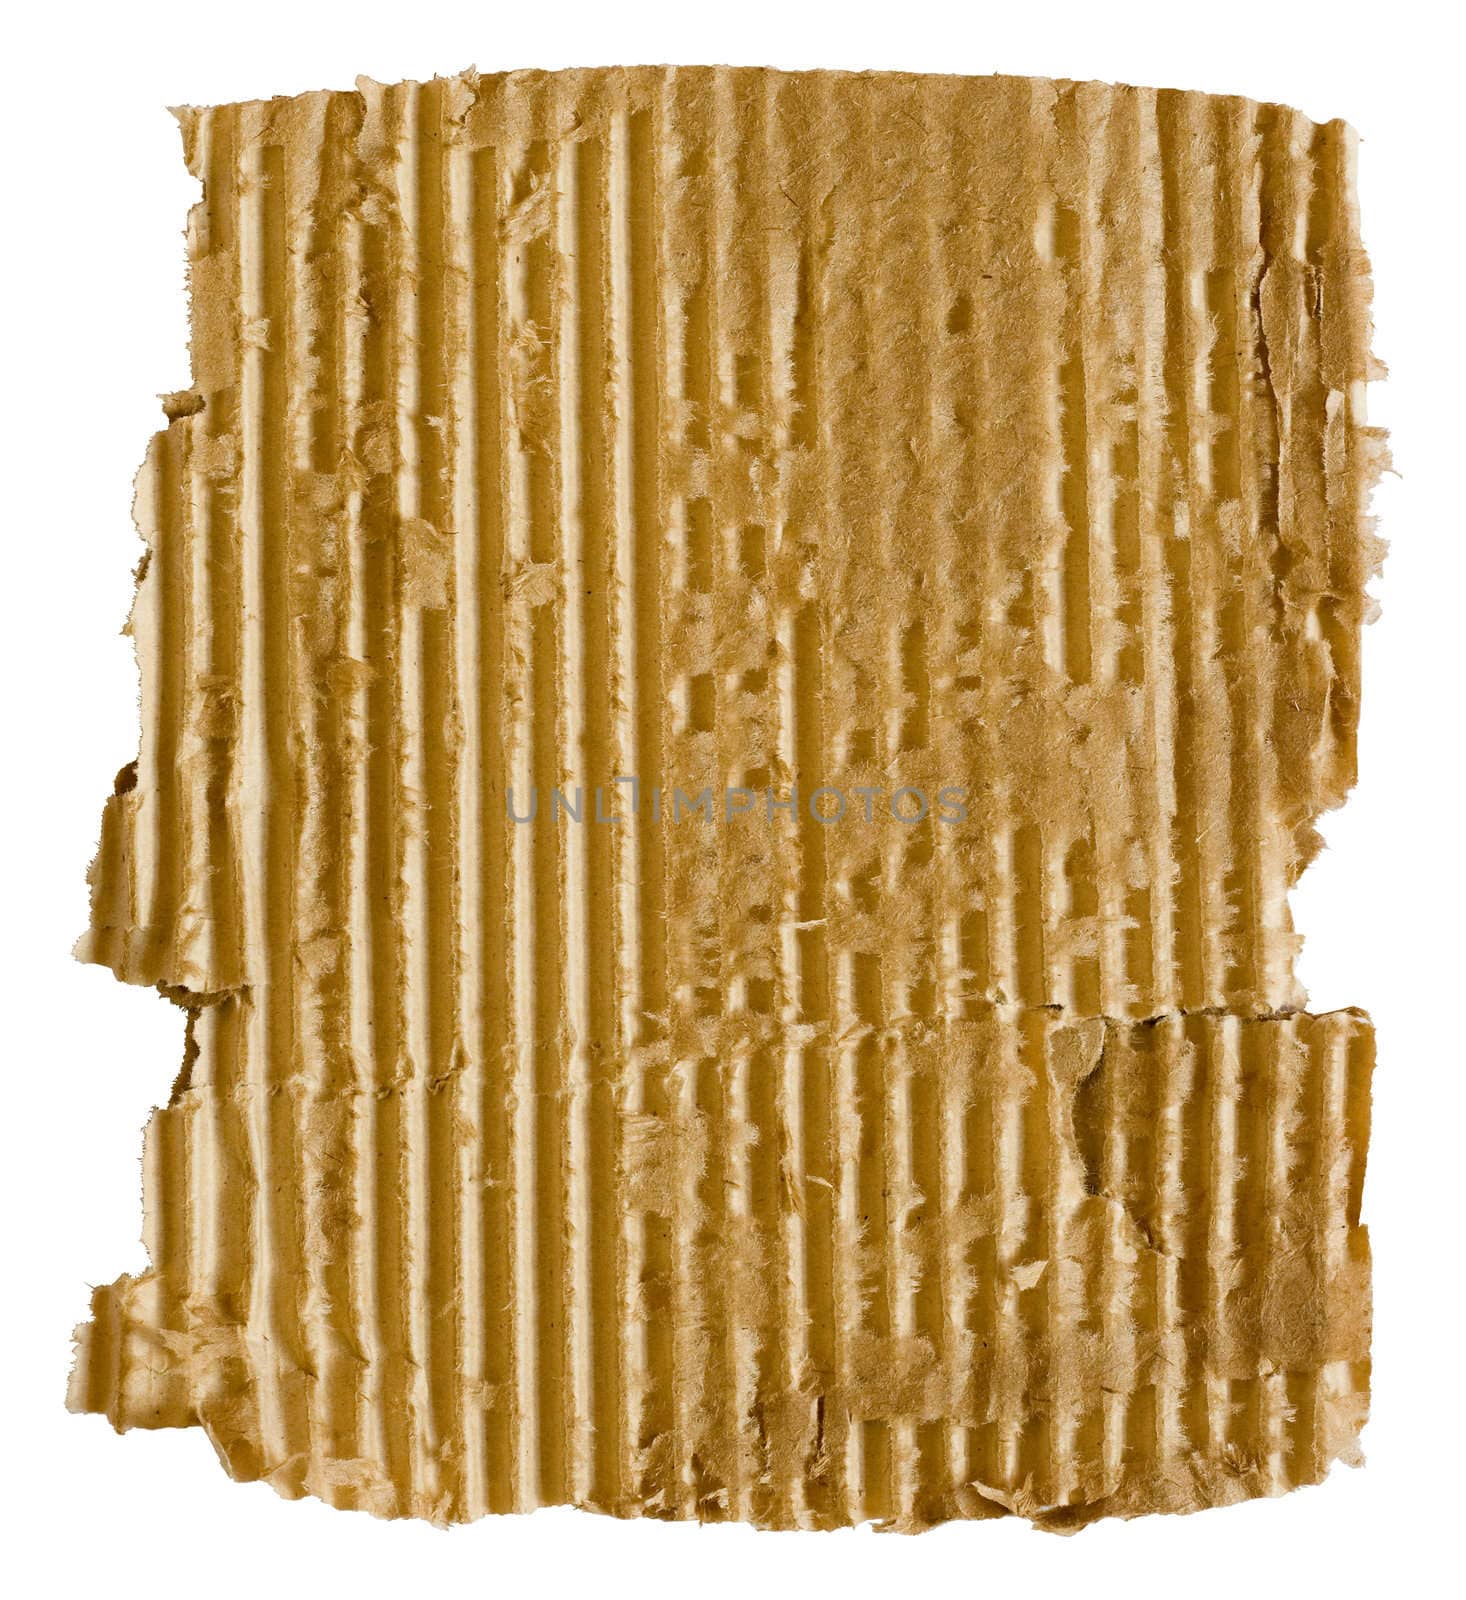 Piece of Old Cardboard Scrap Over White. Clipping path included for easy background removing.